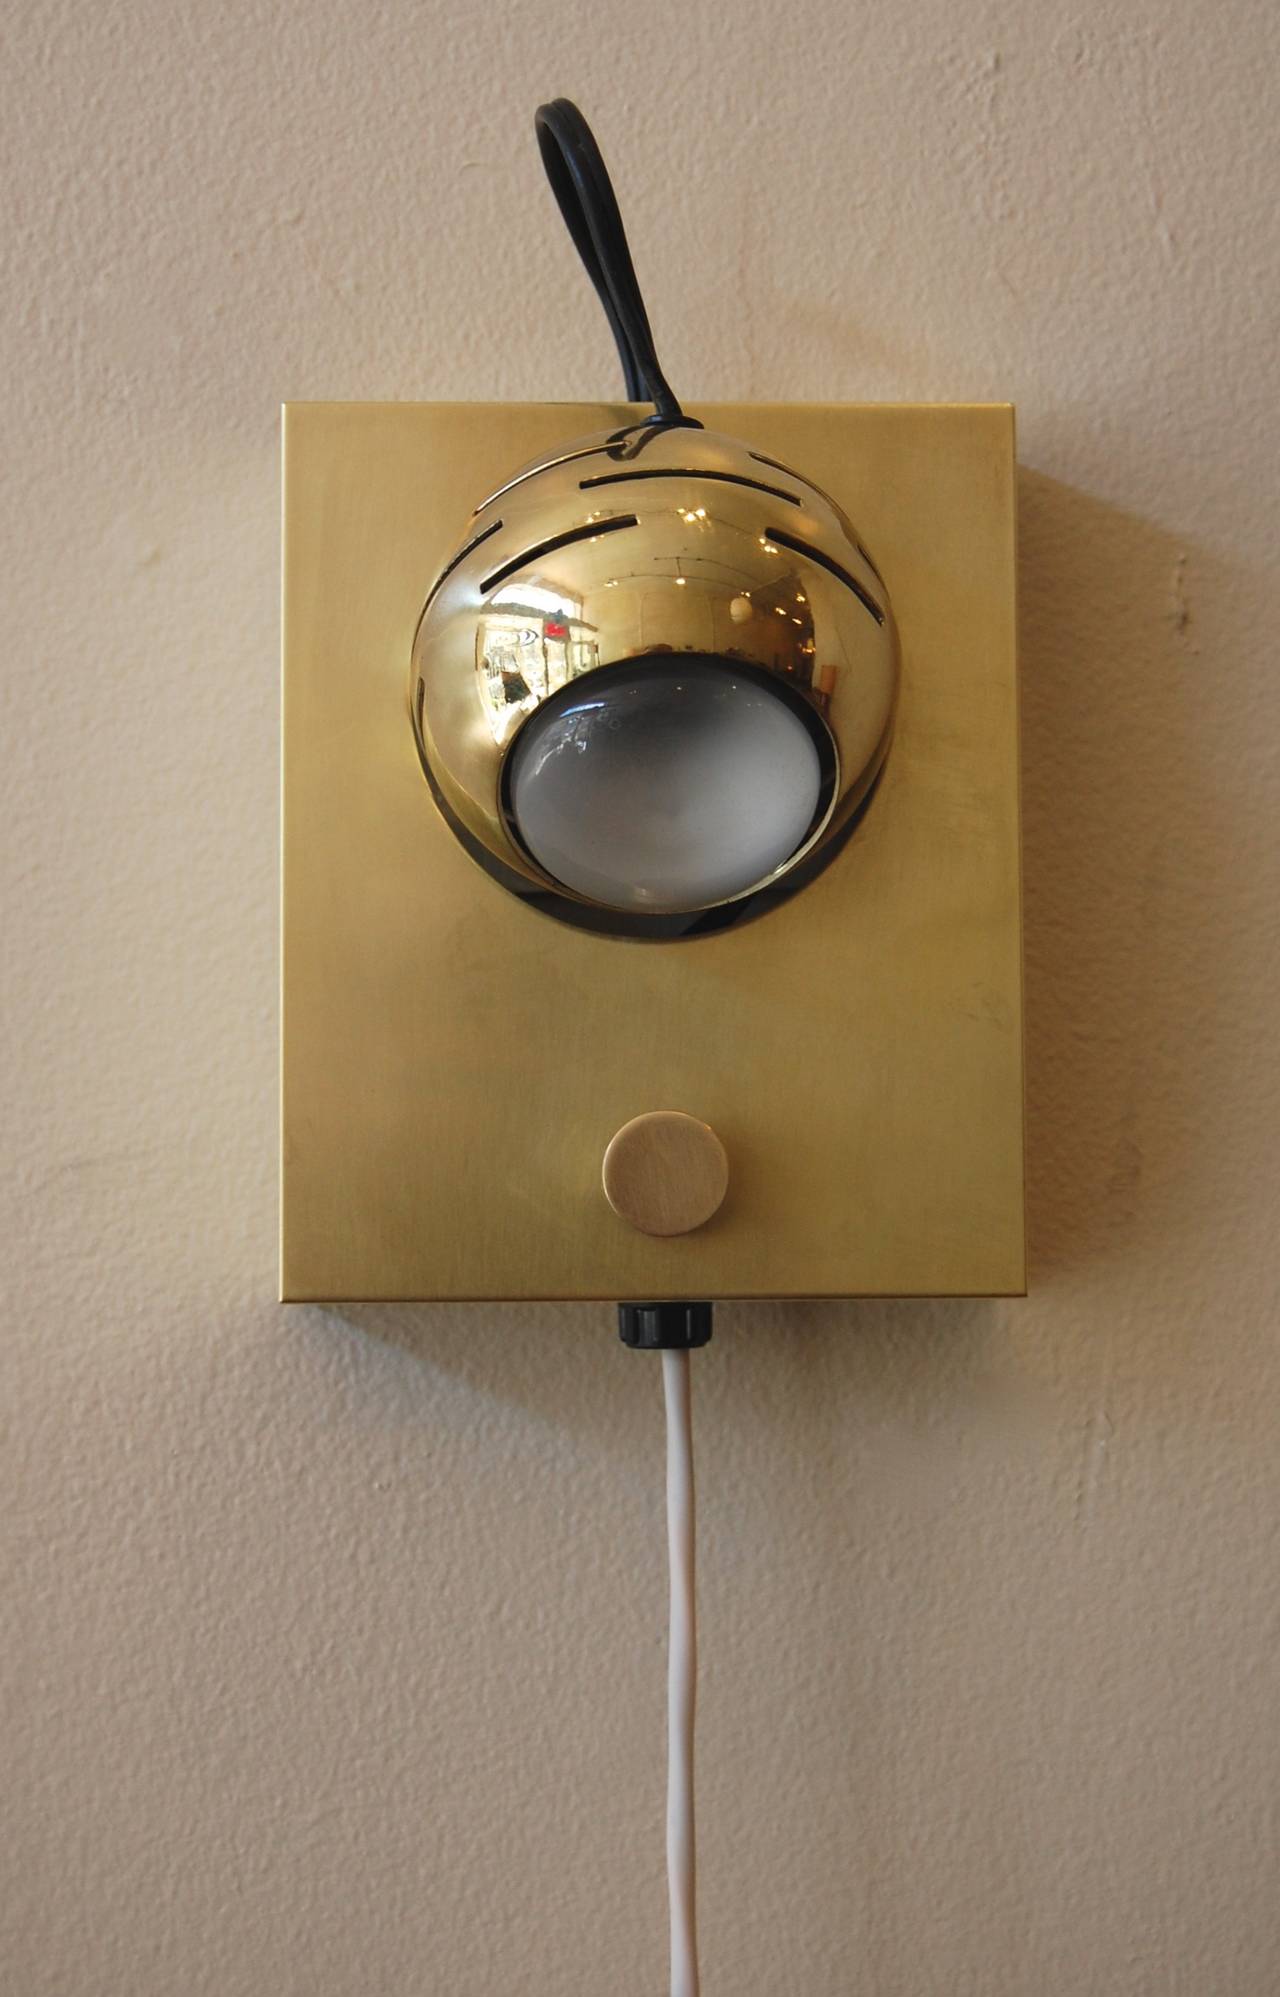 Arredoluce eye ball wall lamp crafted in brass, the ball head is held on by a magnet which allows for a large range of adjustments. The dimmer switch allows one to adjust the volume of light. This lamp has been hand polished, rewired and is labeled.